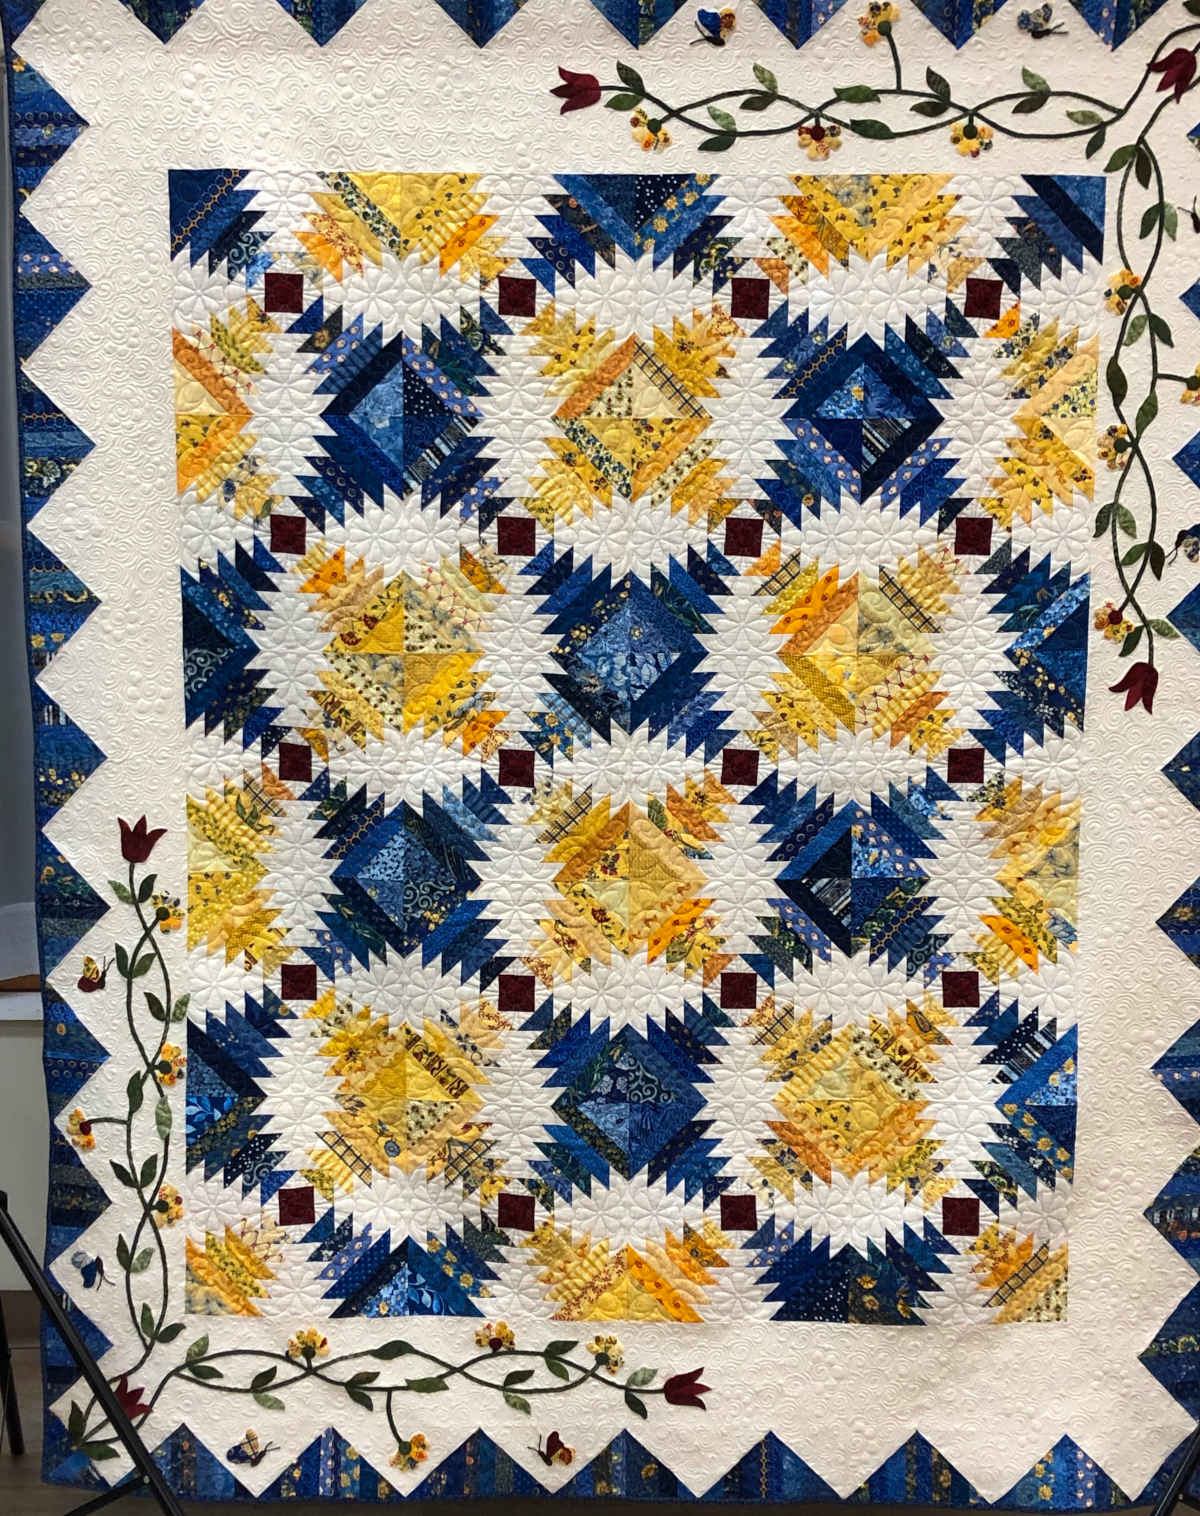 "Le Papillon" is a traditional pineapple block with a country French border. Pieced by AQG members Karen Acosta, Sue Cochrane, Carolyn Dixson, Jane Mullenix, Dawn Ott, Adrienne Randall and Polly Schatz. Applique border by Janice Reece. Custom quilting by Kate Gollsneider and Rebecca Musliner.